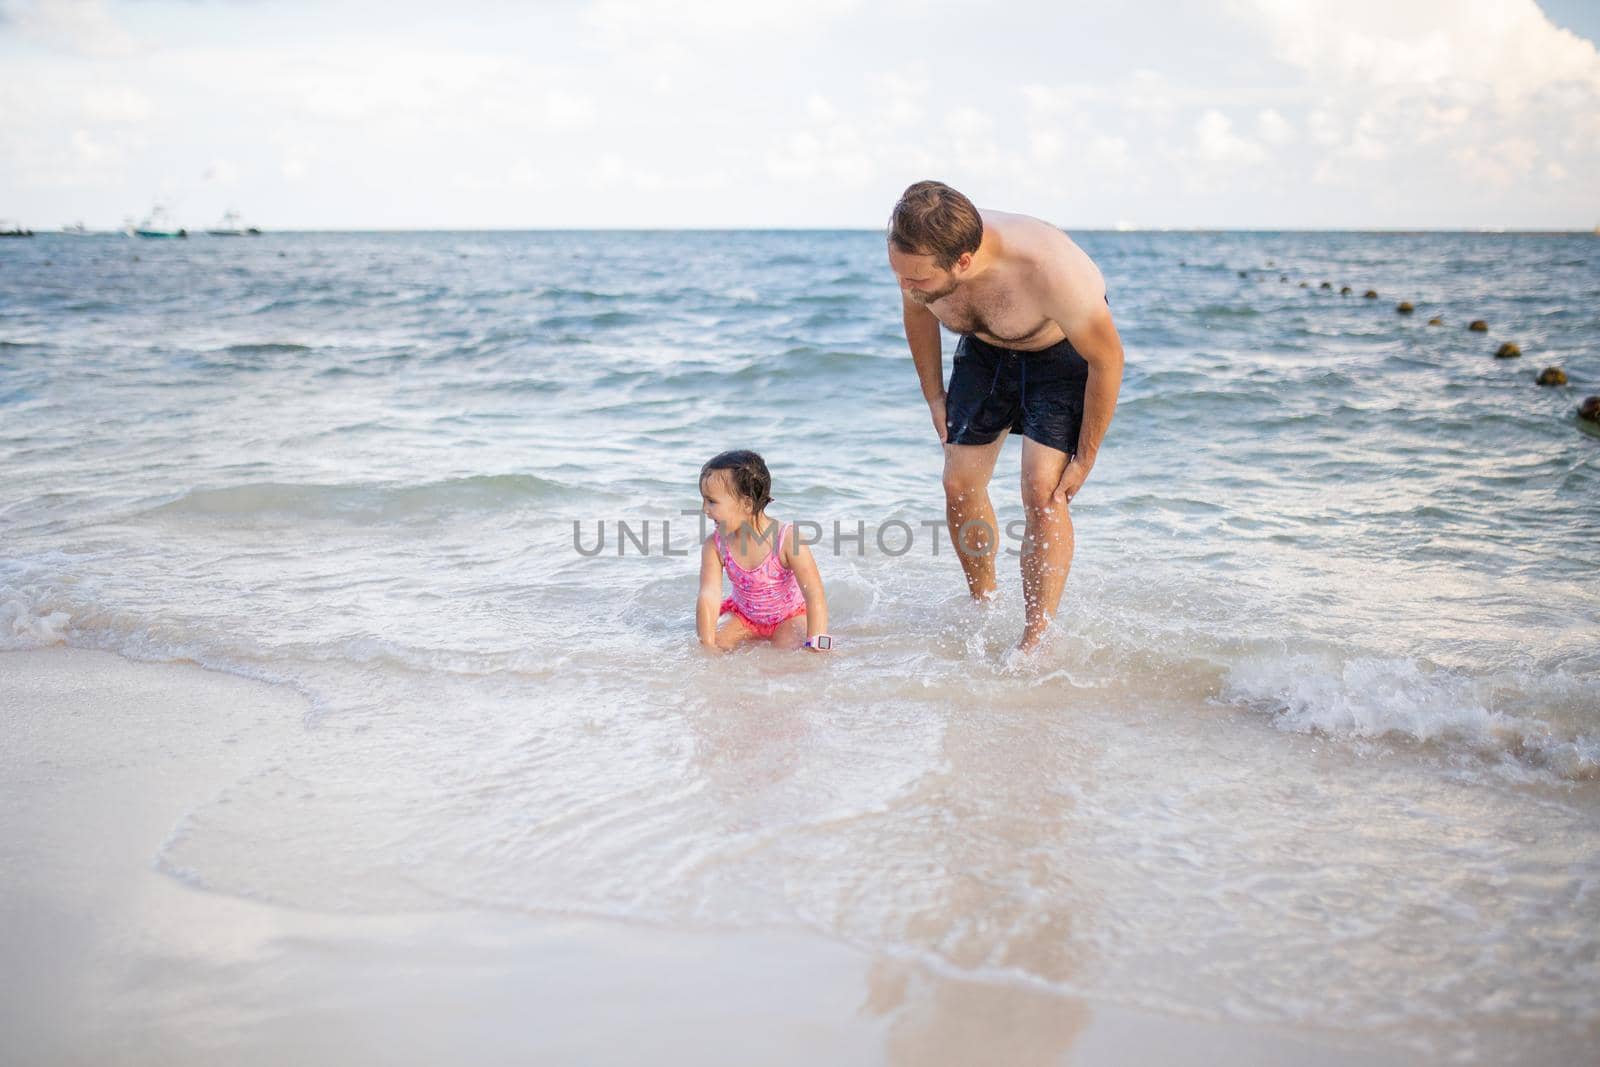 Happy father and young daughter joyfully playing in the water at the beach. Man and cute young child having fun in sea. Tropical summer vacations